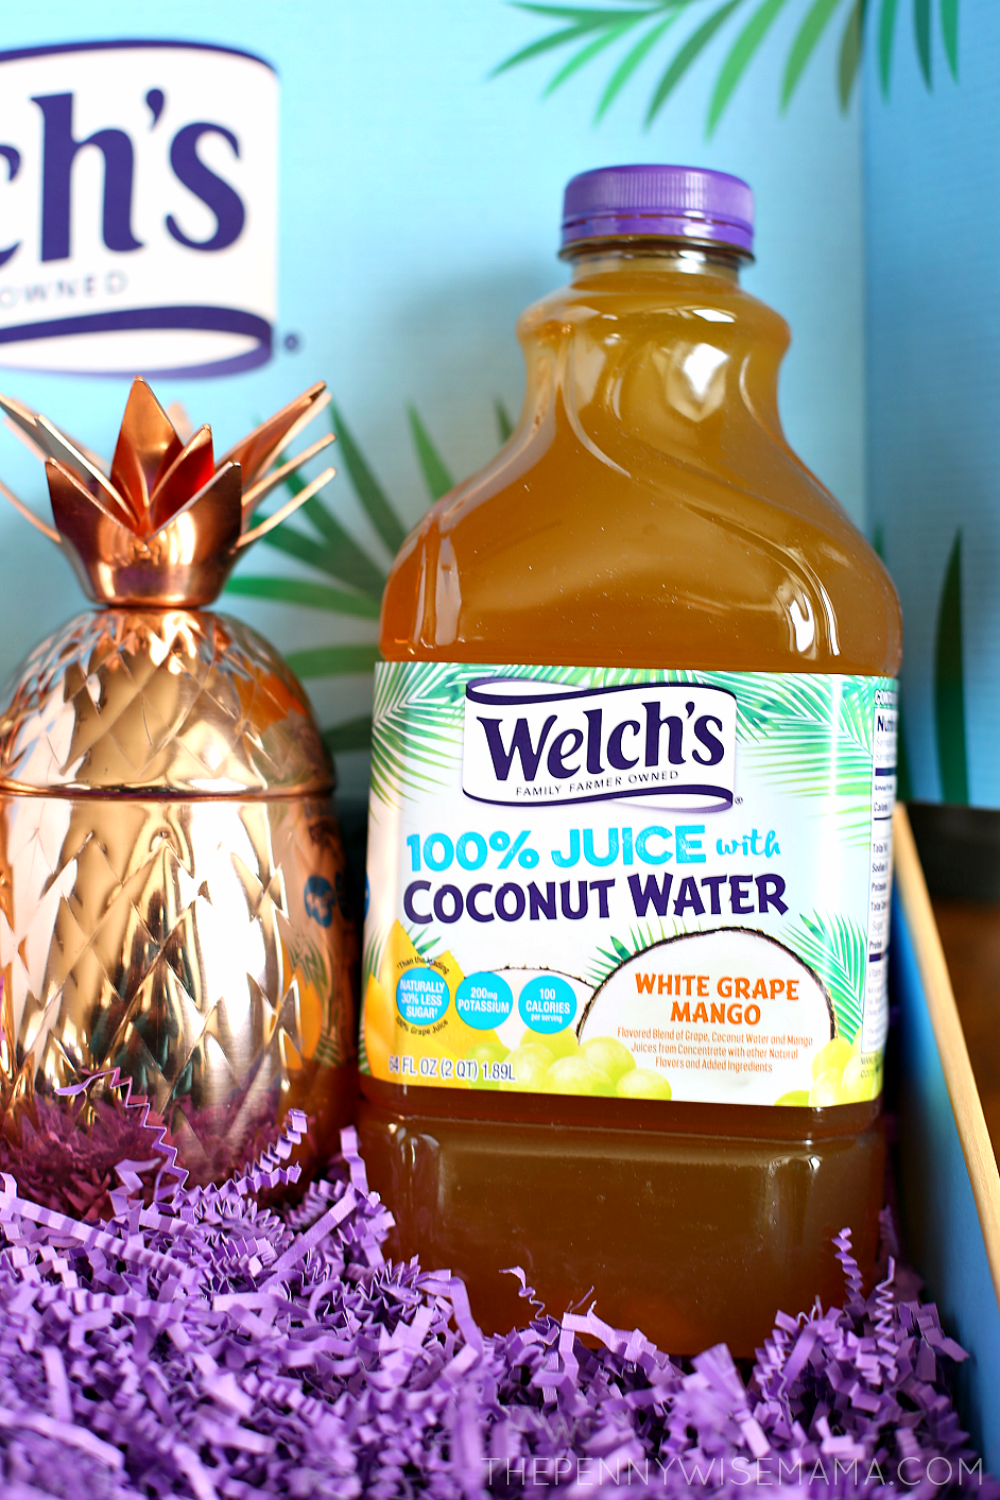 Welch's 100% Juice with Coconut Water - White Grape Mango